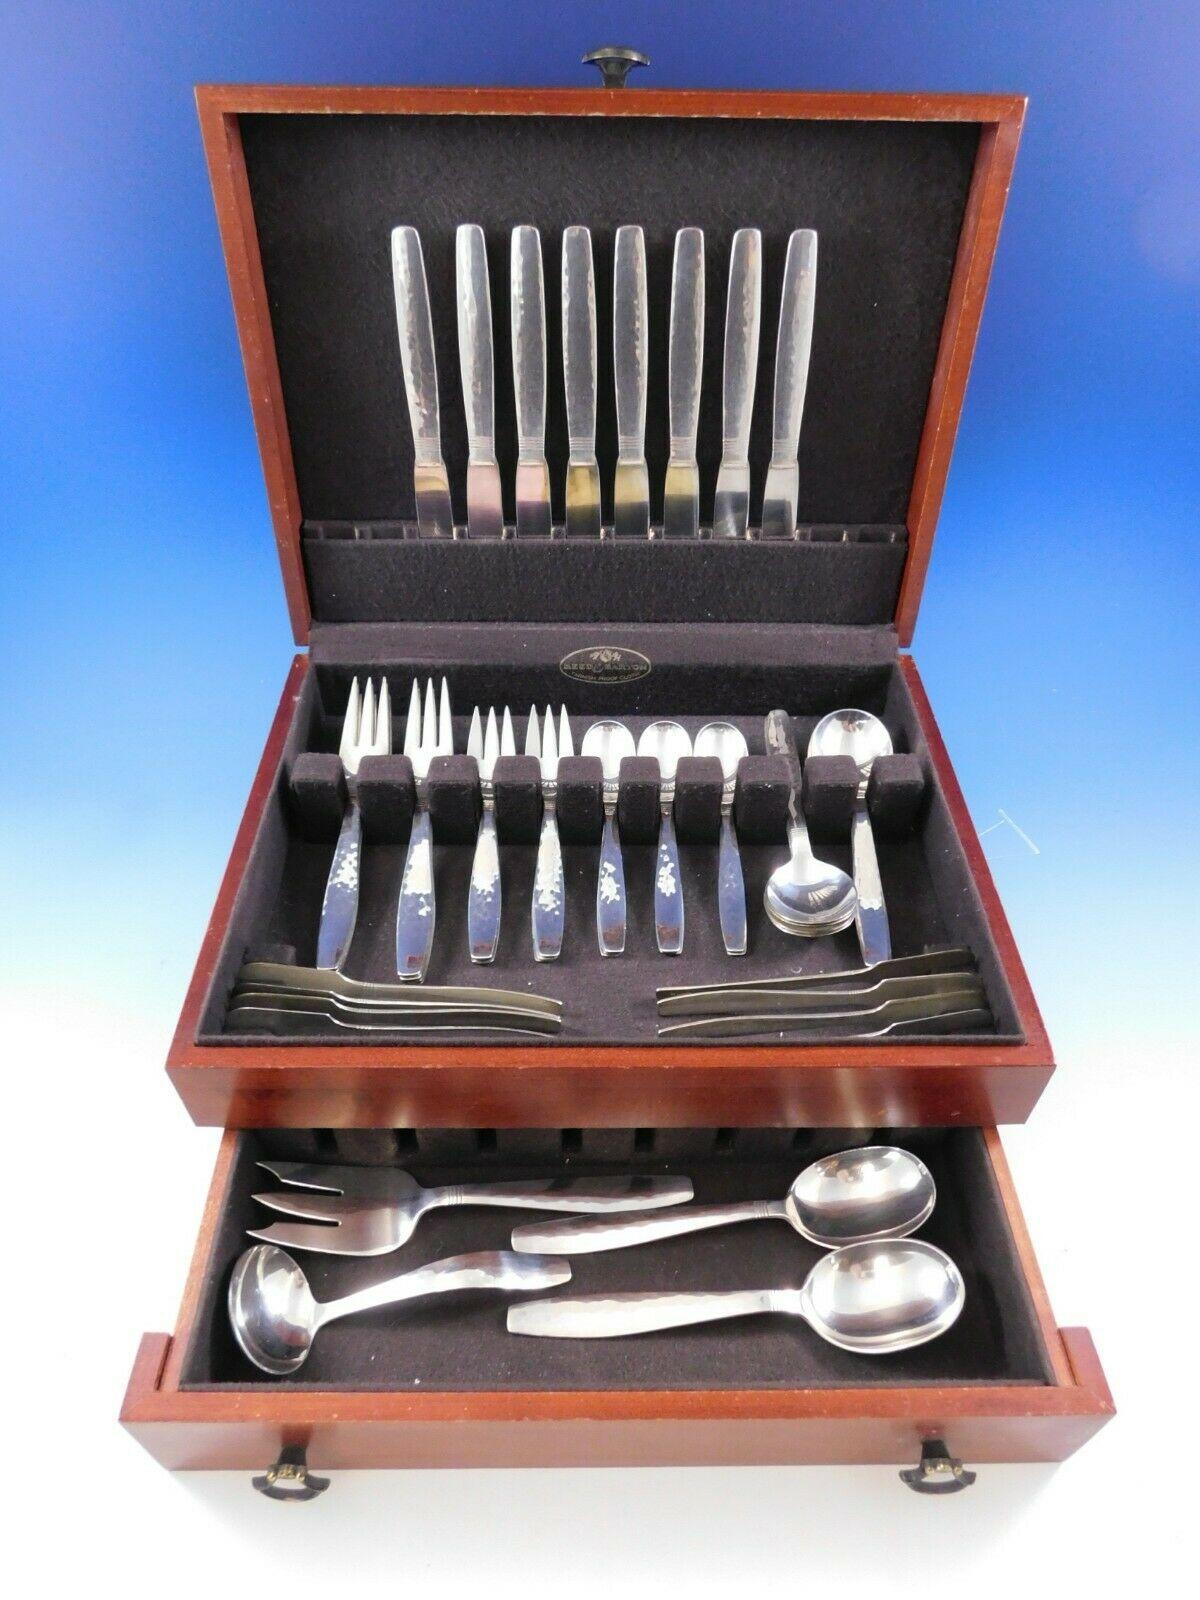 Swedish modern by Allan Adler handwrought sterling silver flatware set with subtle hand-hammered finish, 52 pieces. This set includes:

· 8 dinner knives (solid handles), 8 3/4